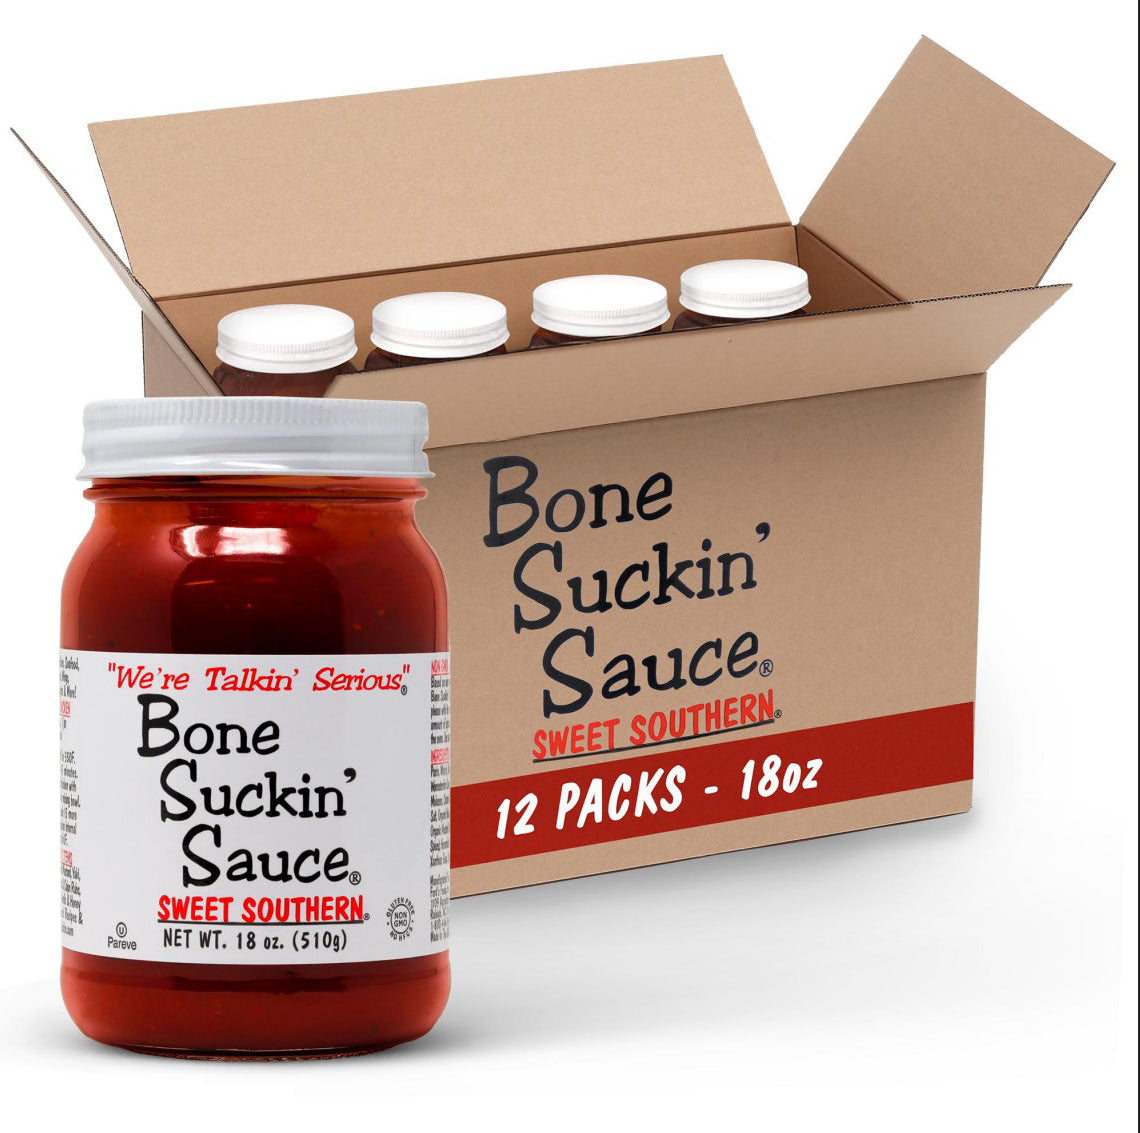 Bone Suckin Sauce® Sweet Southern®, 18 oz, 12 pack Bone Suckin' Sauce is the small batch craft barbecue sauce that is 3rd party tested & verified, Made in the USA in glass bottles, beloved by the entire family for its delicuous taste and unmatched versatility. This exceptional sauce is Non-GMO, Gluten-Free, Kosher and has No High Fructose Corn Syrup, offering both health-consciousness and unparalleled taste and quality.